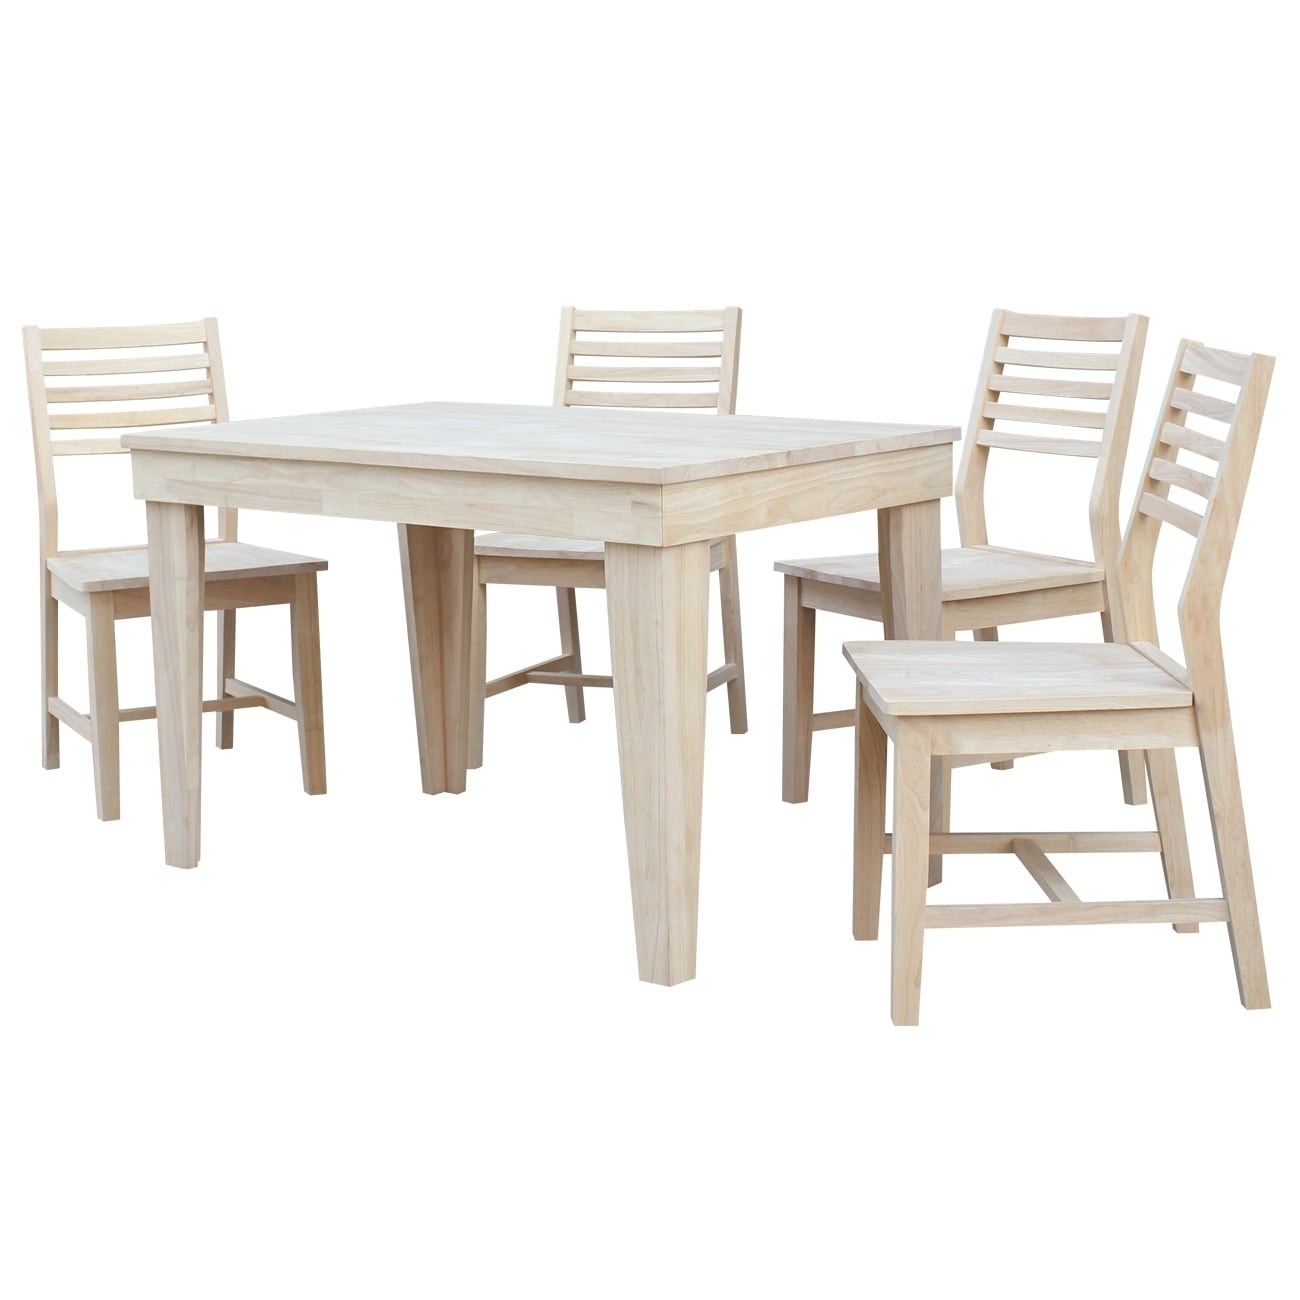 Aspen Solid Wood Dining Table With 4 Aspen Slat Chairs Unfinished 5 Piece Set Overstock 22815462